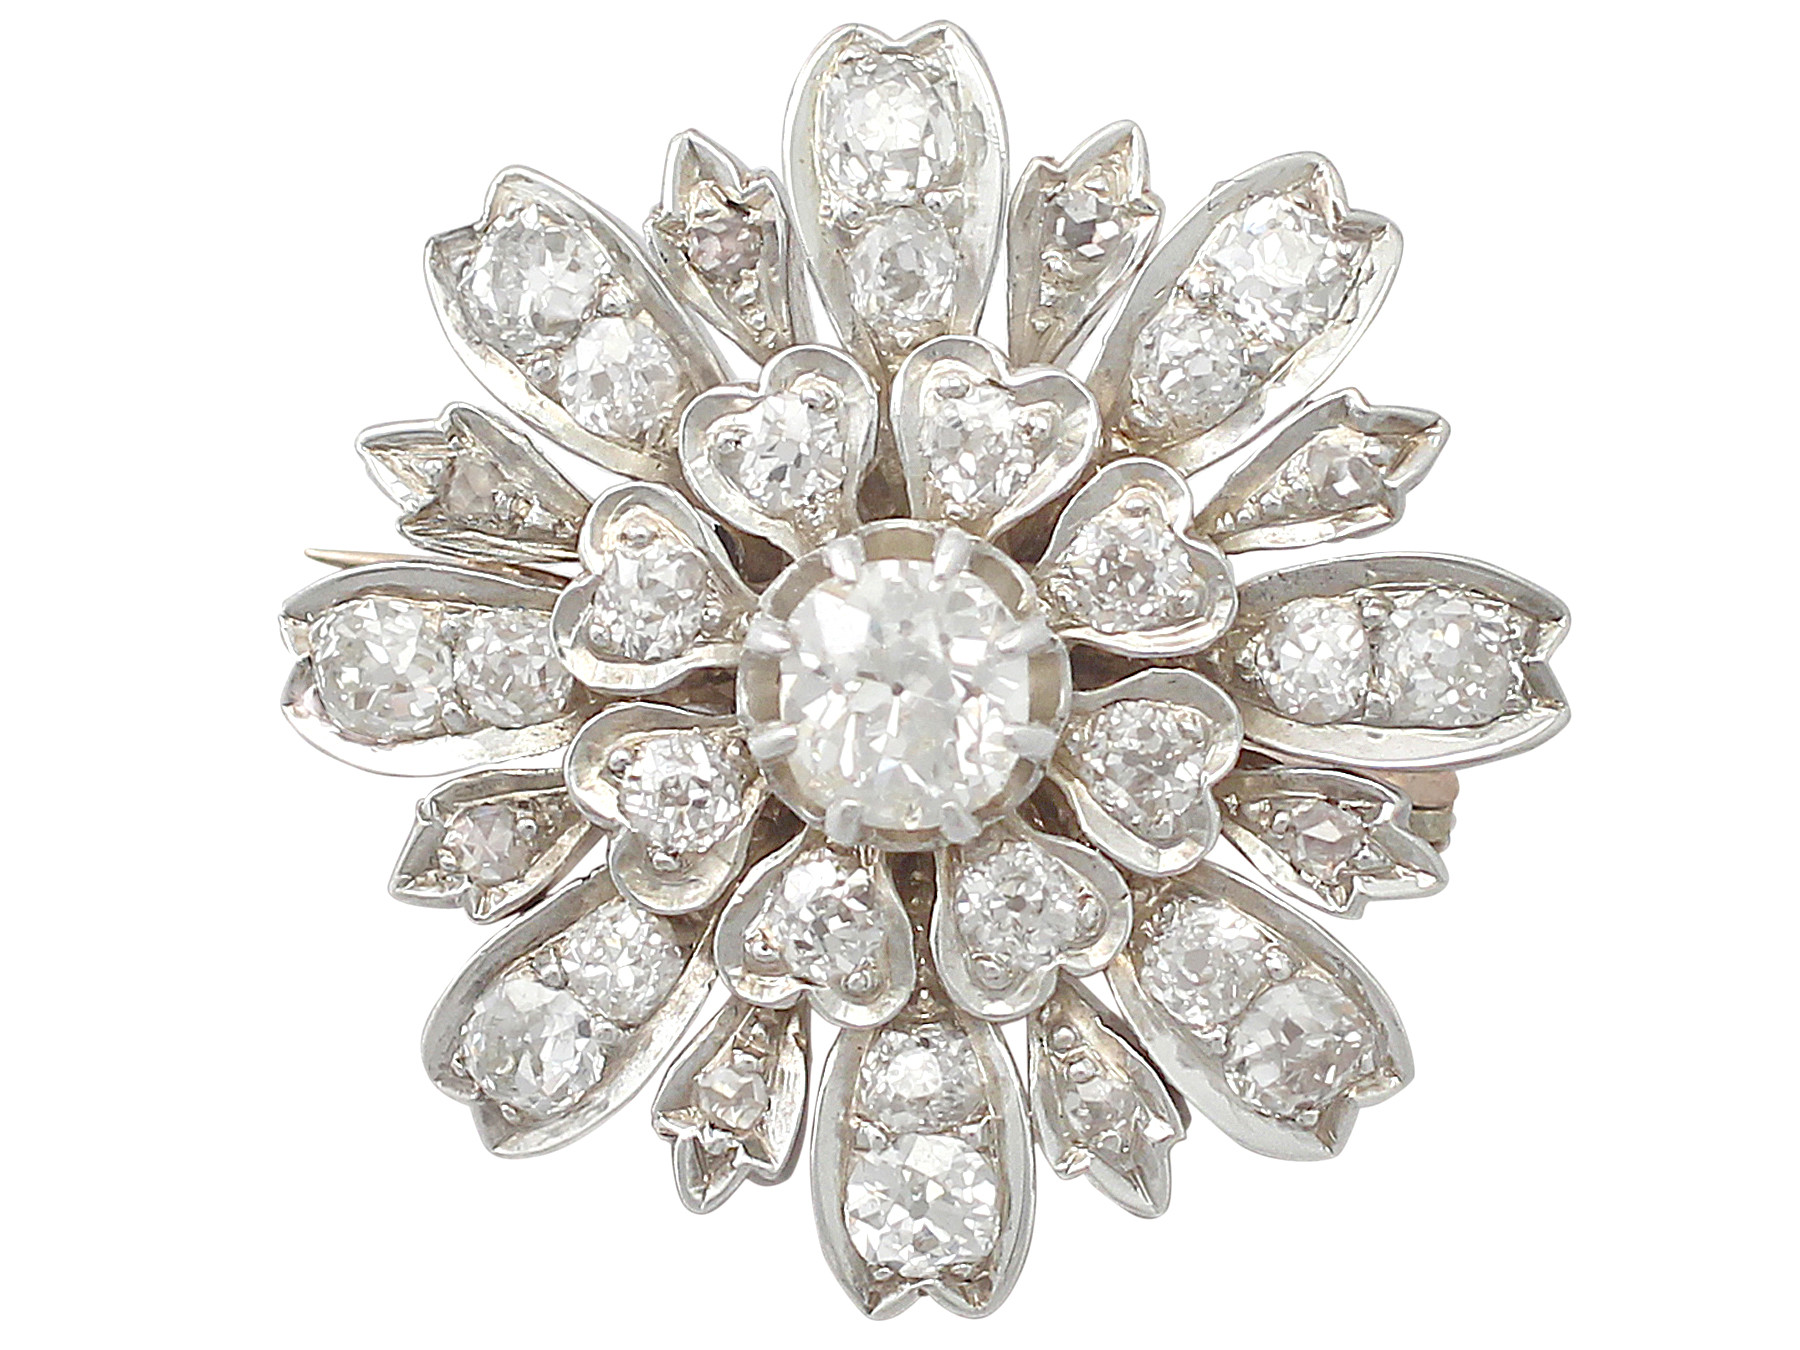 diamond brooch antique 4.08 ct diamond and 9 ct yellow gold, silver set brooch mzofotk